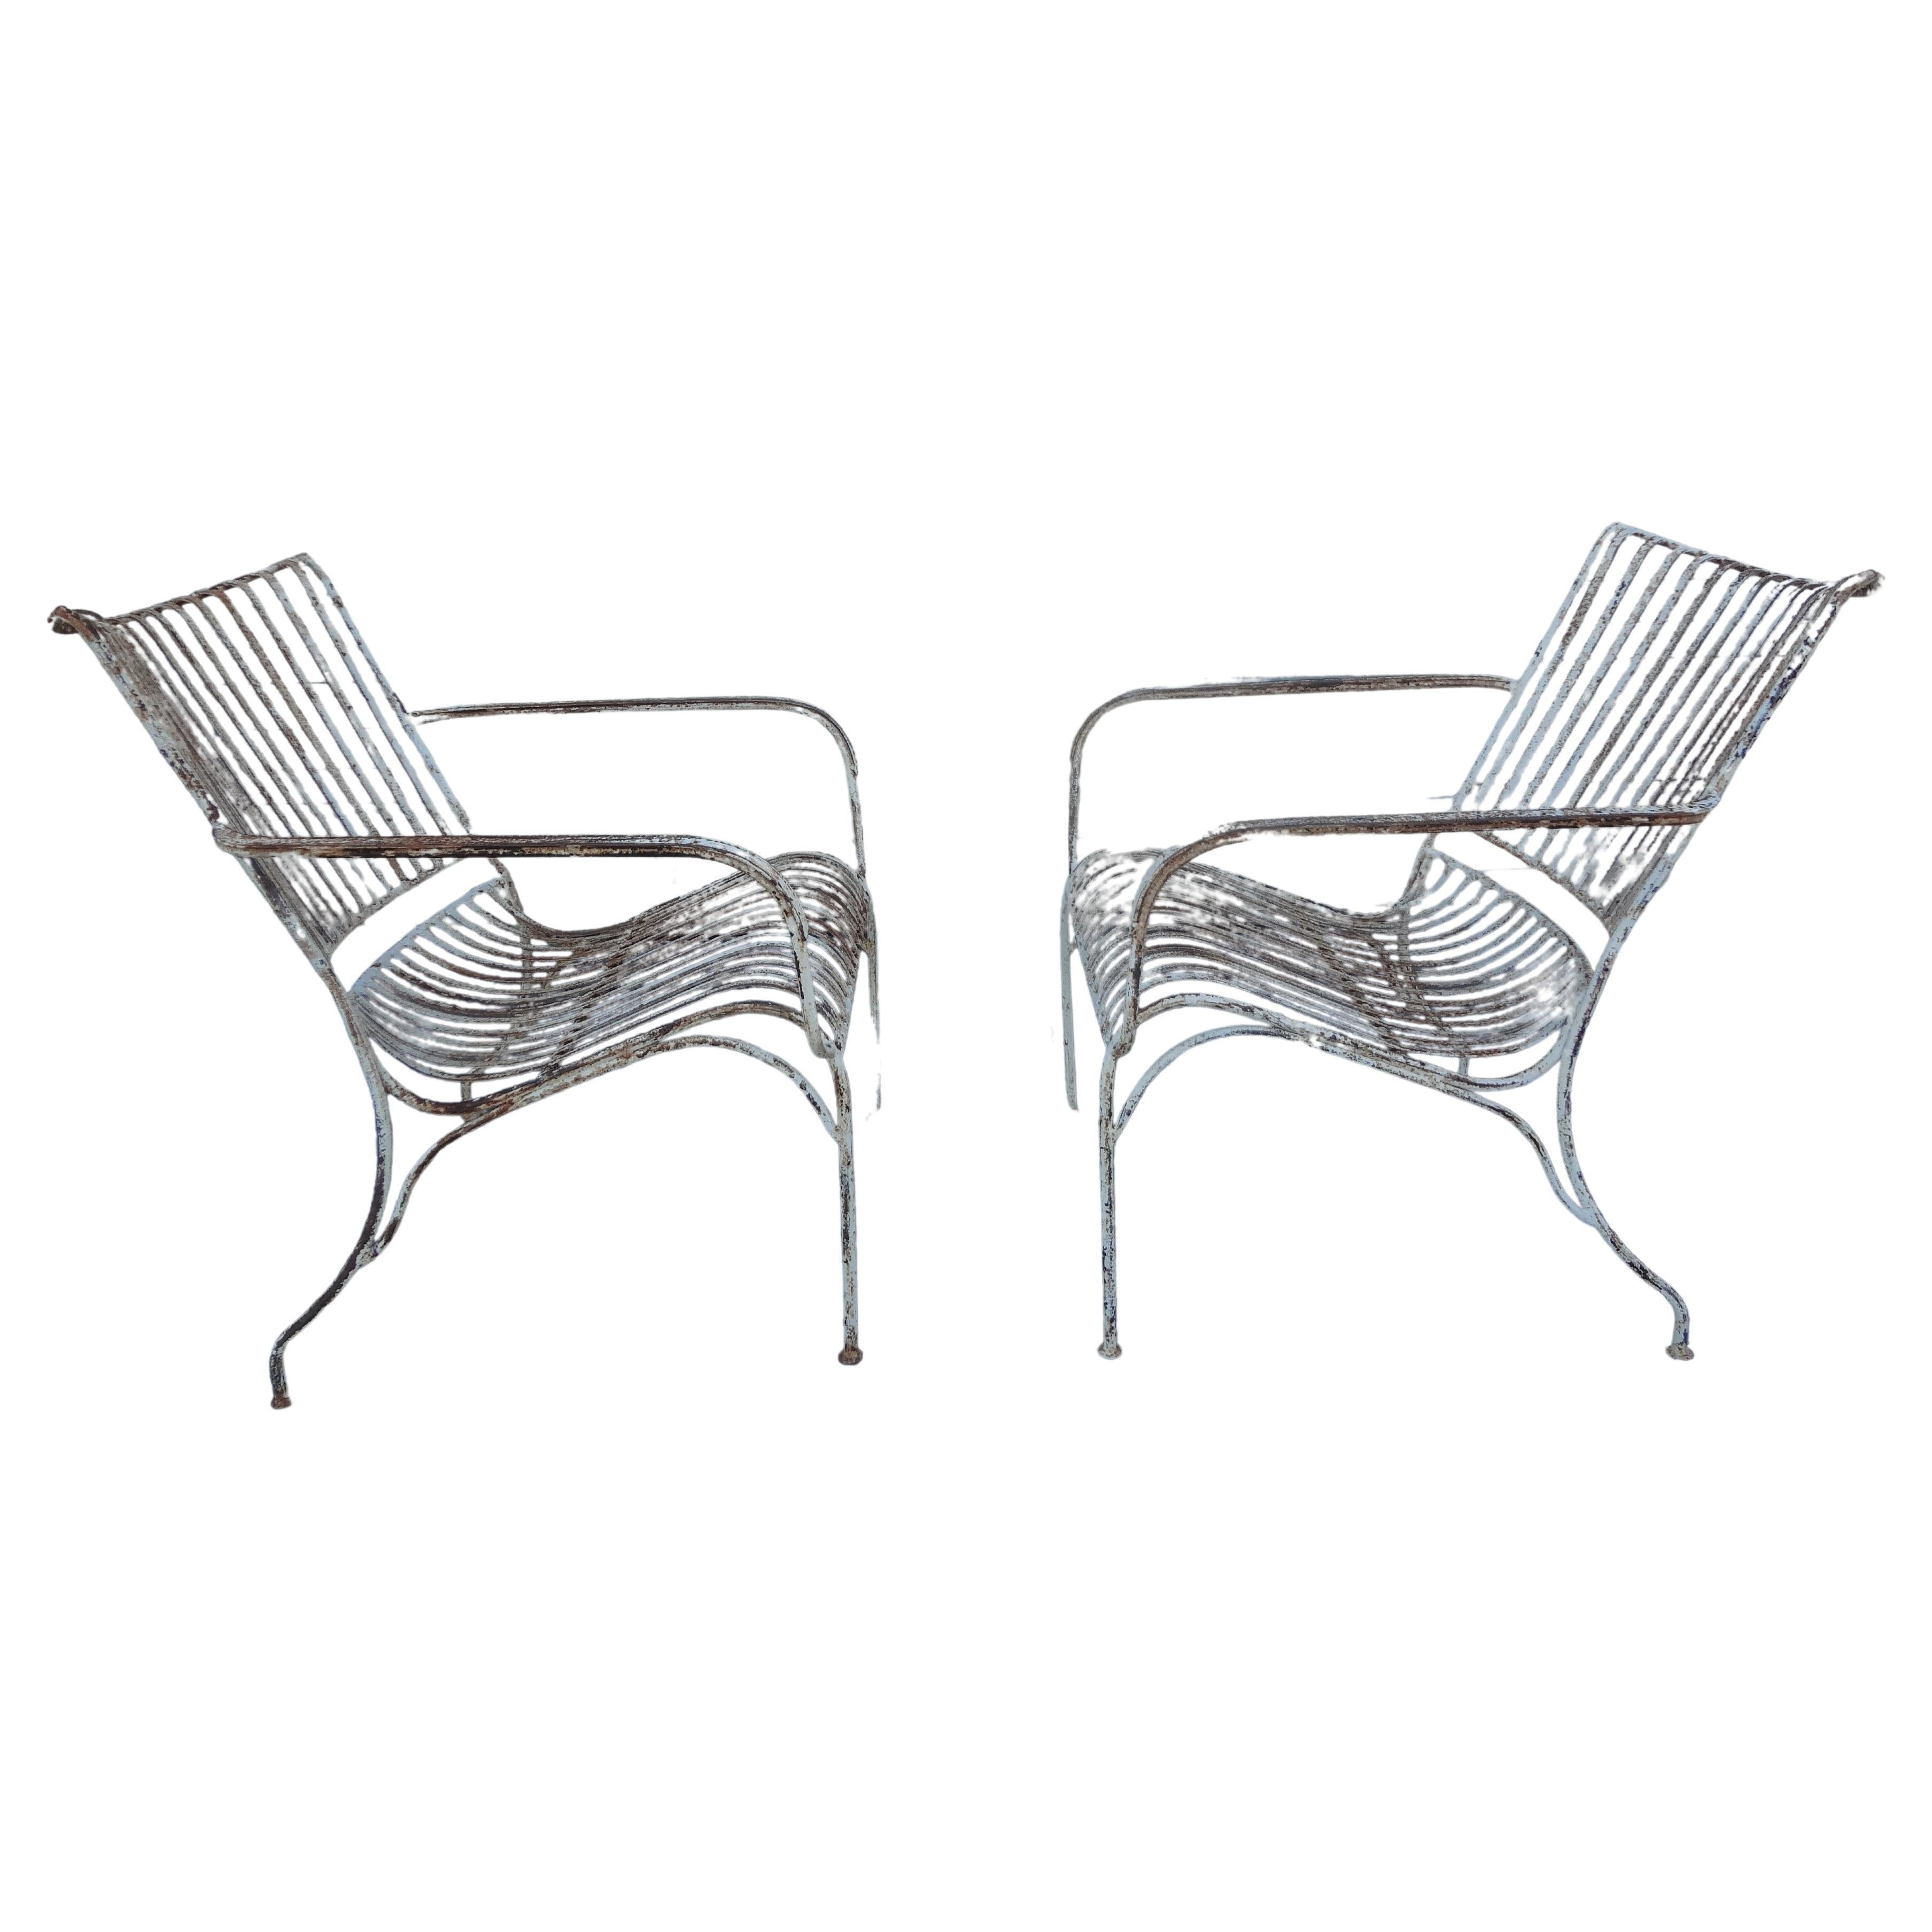 Pair Of French Wrought Iron Garden Chairs For Sale 6